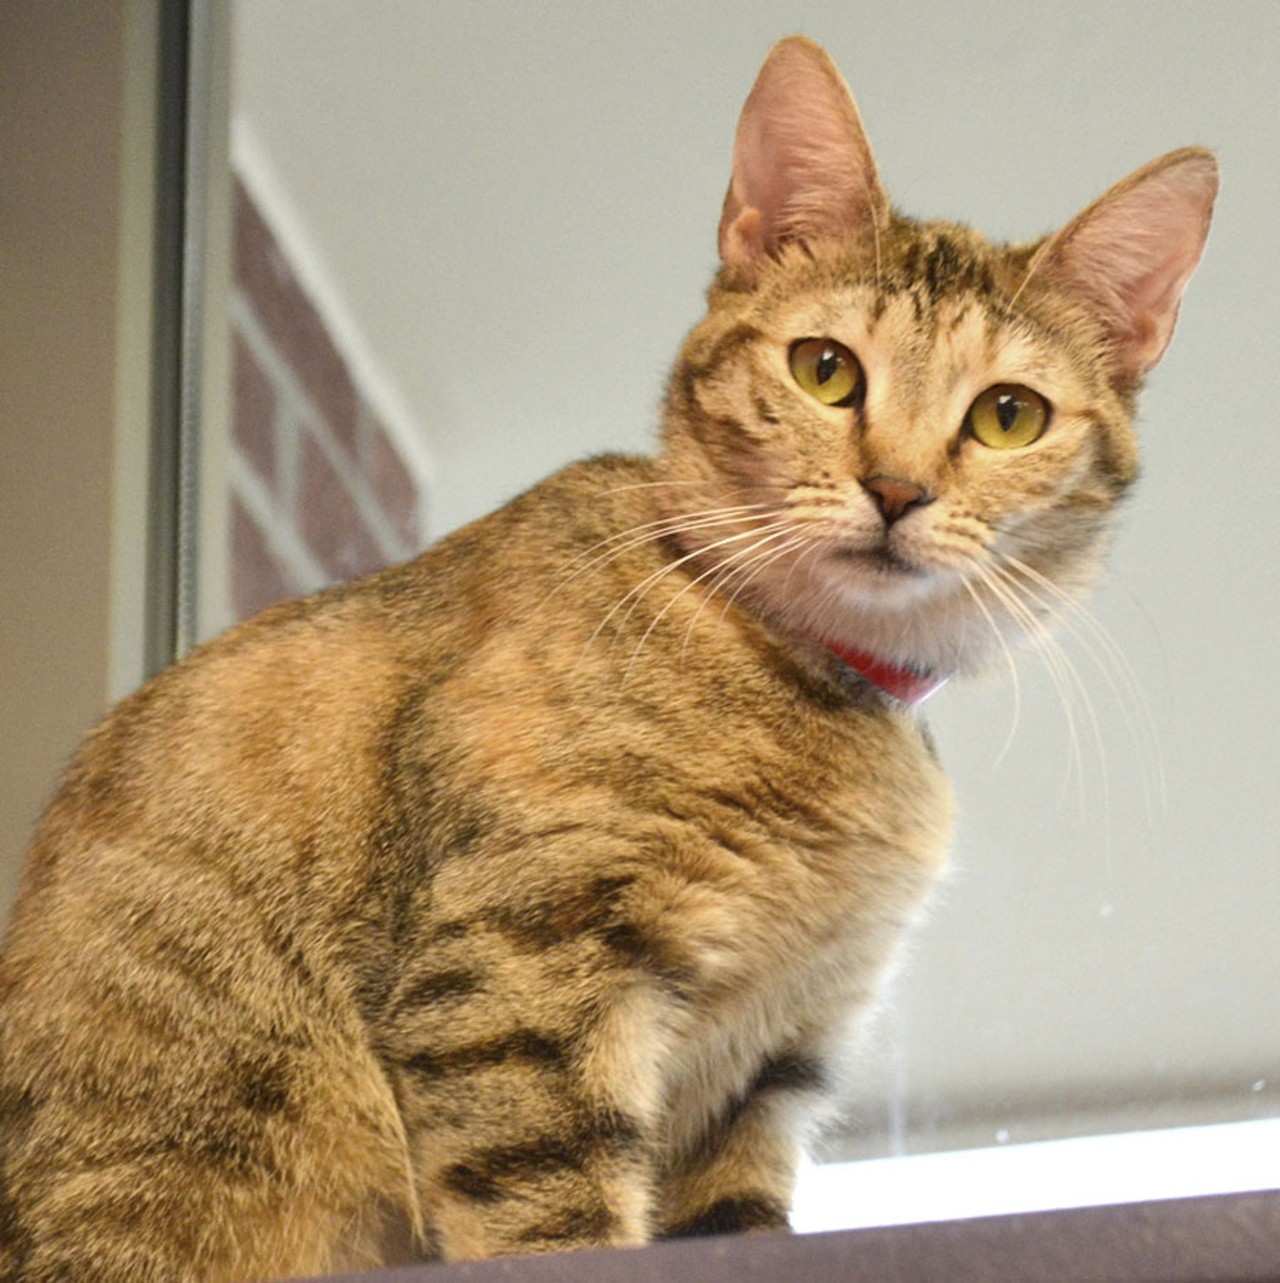 NAME: Carmen
GENDER: Female
BREED: Domestic Short Hair
AGE: 1 year, 1 month
WEIGHT: 6 pounds
SPECIAL CONSIDERATIONS: May prefer a home without children
REASON I CAME TO MHS: Agency transfer
LOCATION: Berman Center for Animal Care in Westland
ID NUMBER: 865899